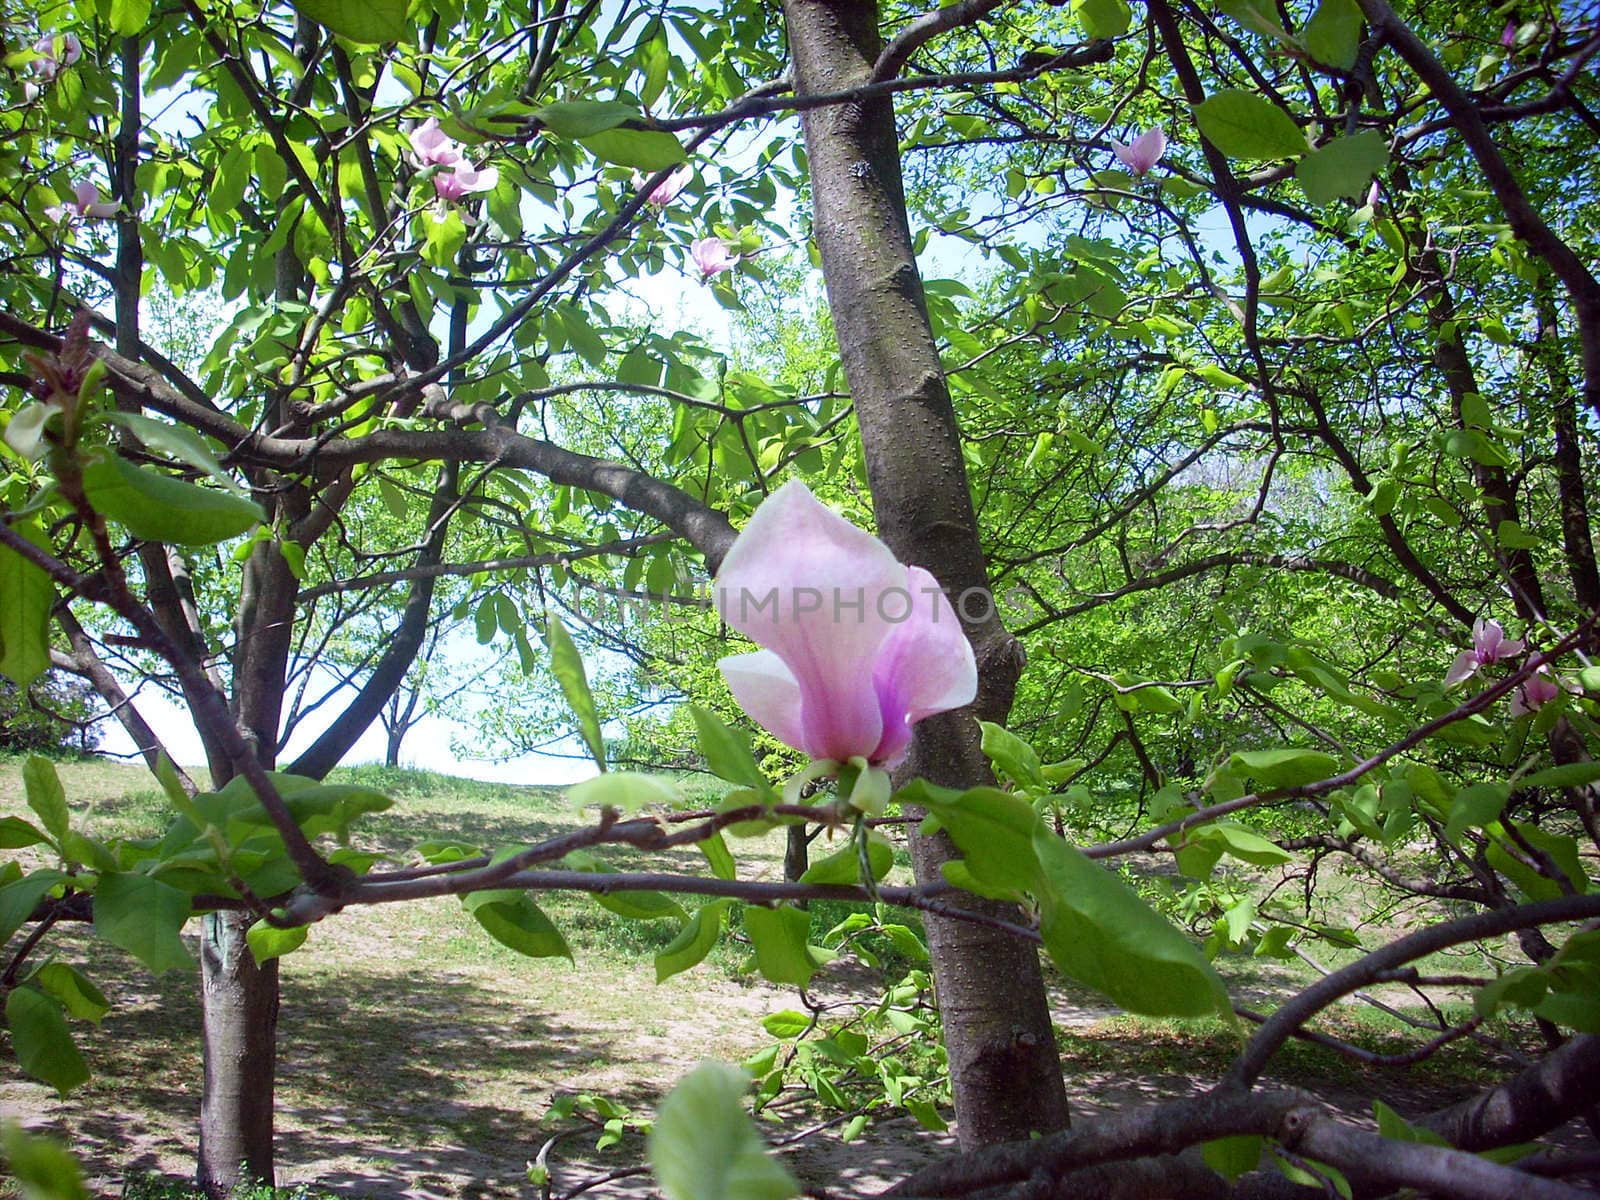 Magnolia flower on the branch